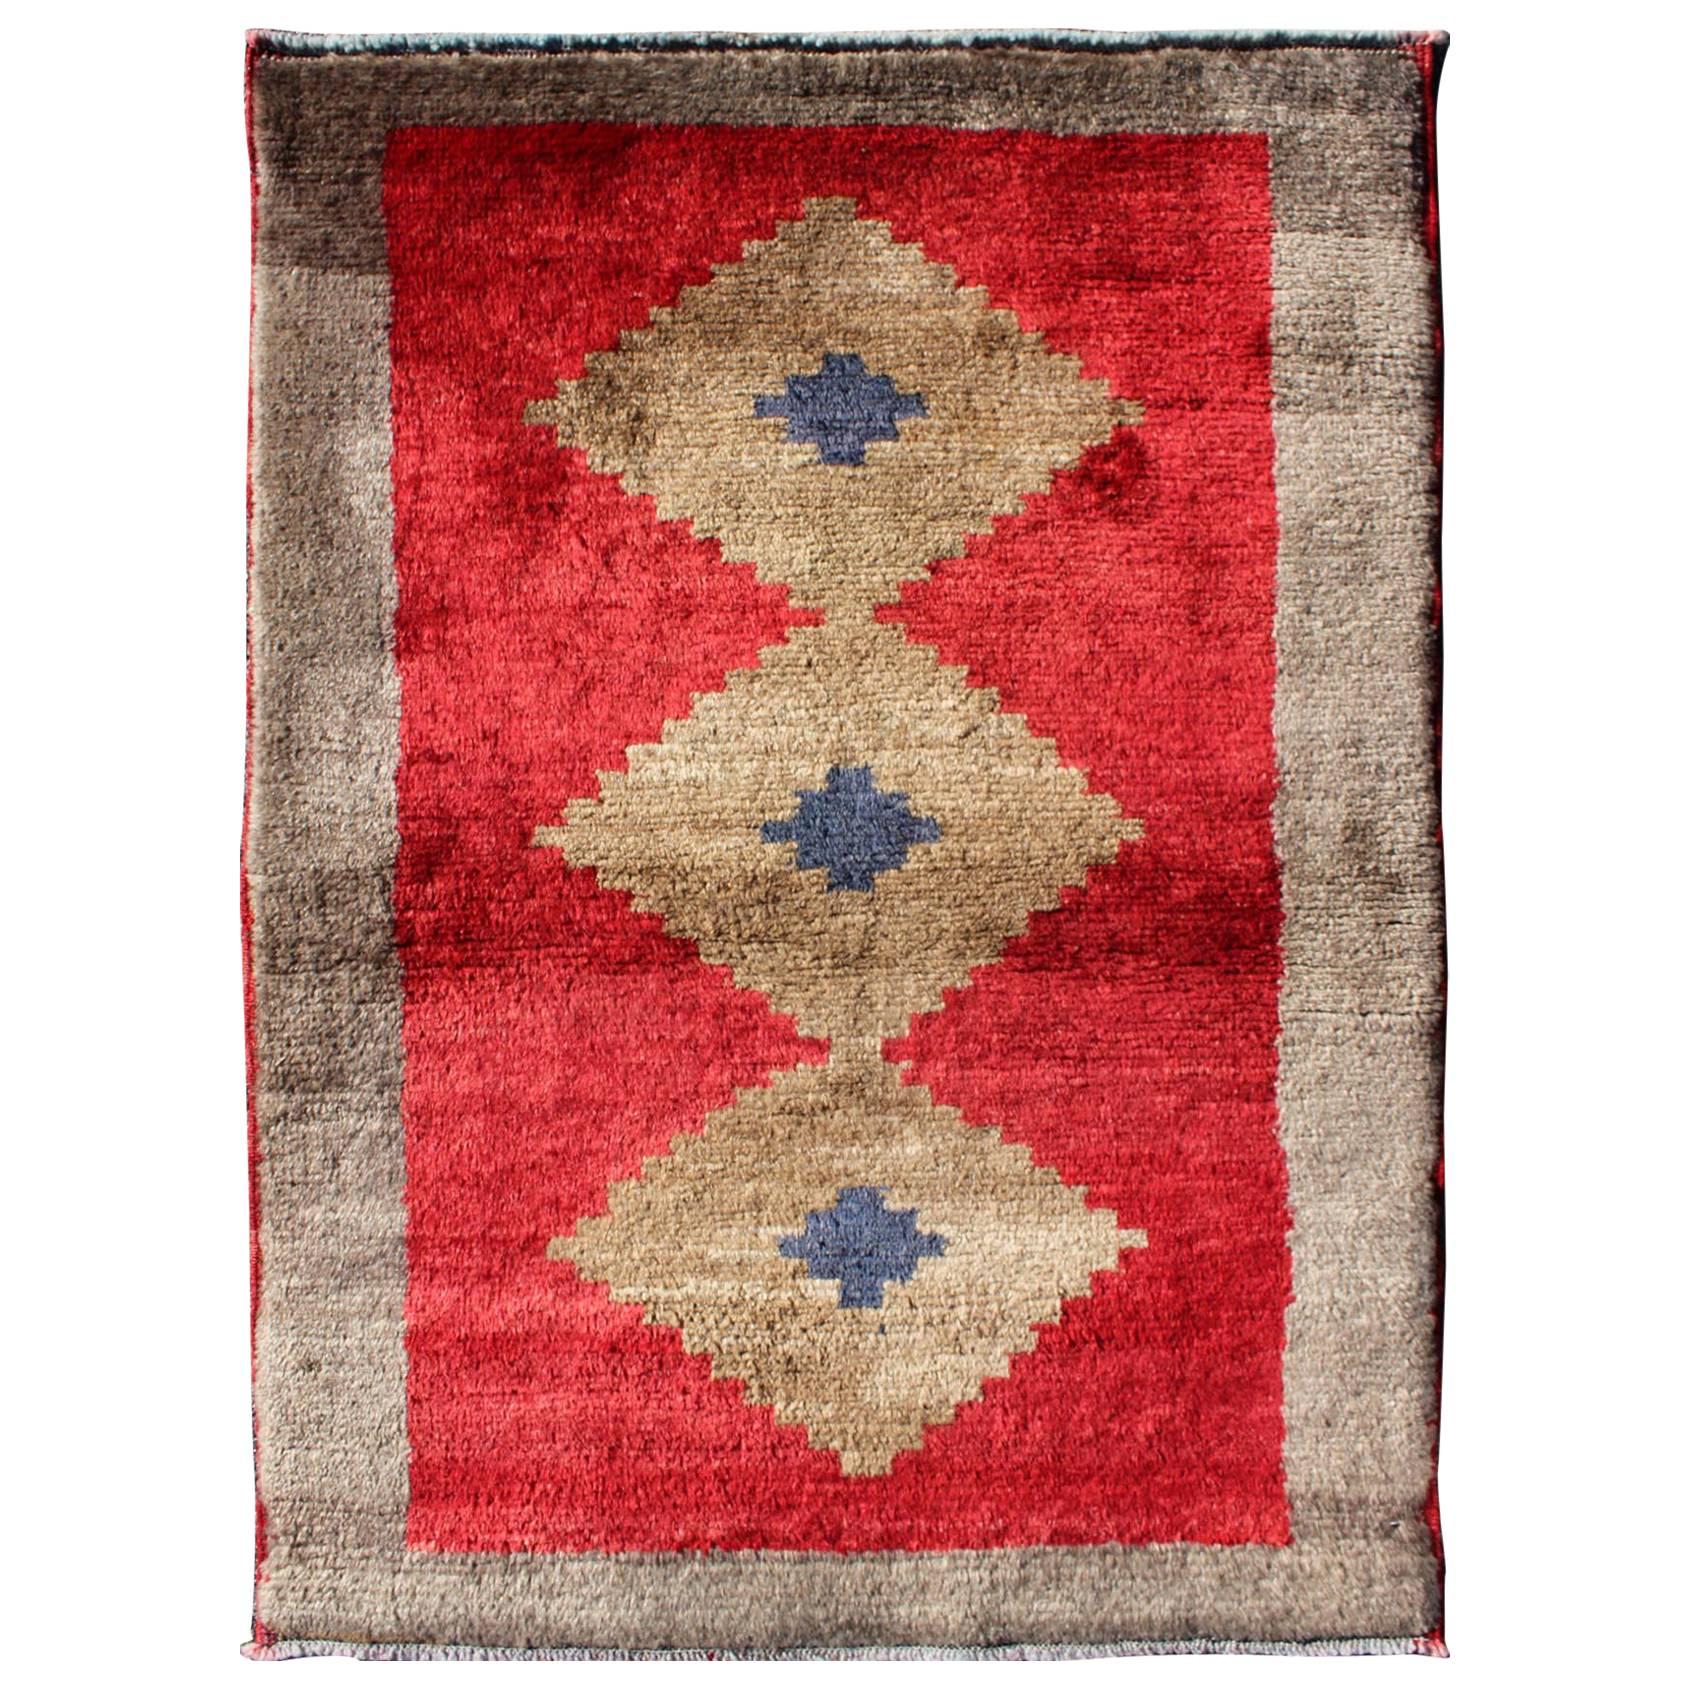 Midcentury Turkish Tulu Rug with Diamond Design in Bright Red and Tan Colors For Sale